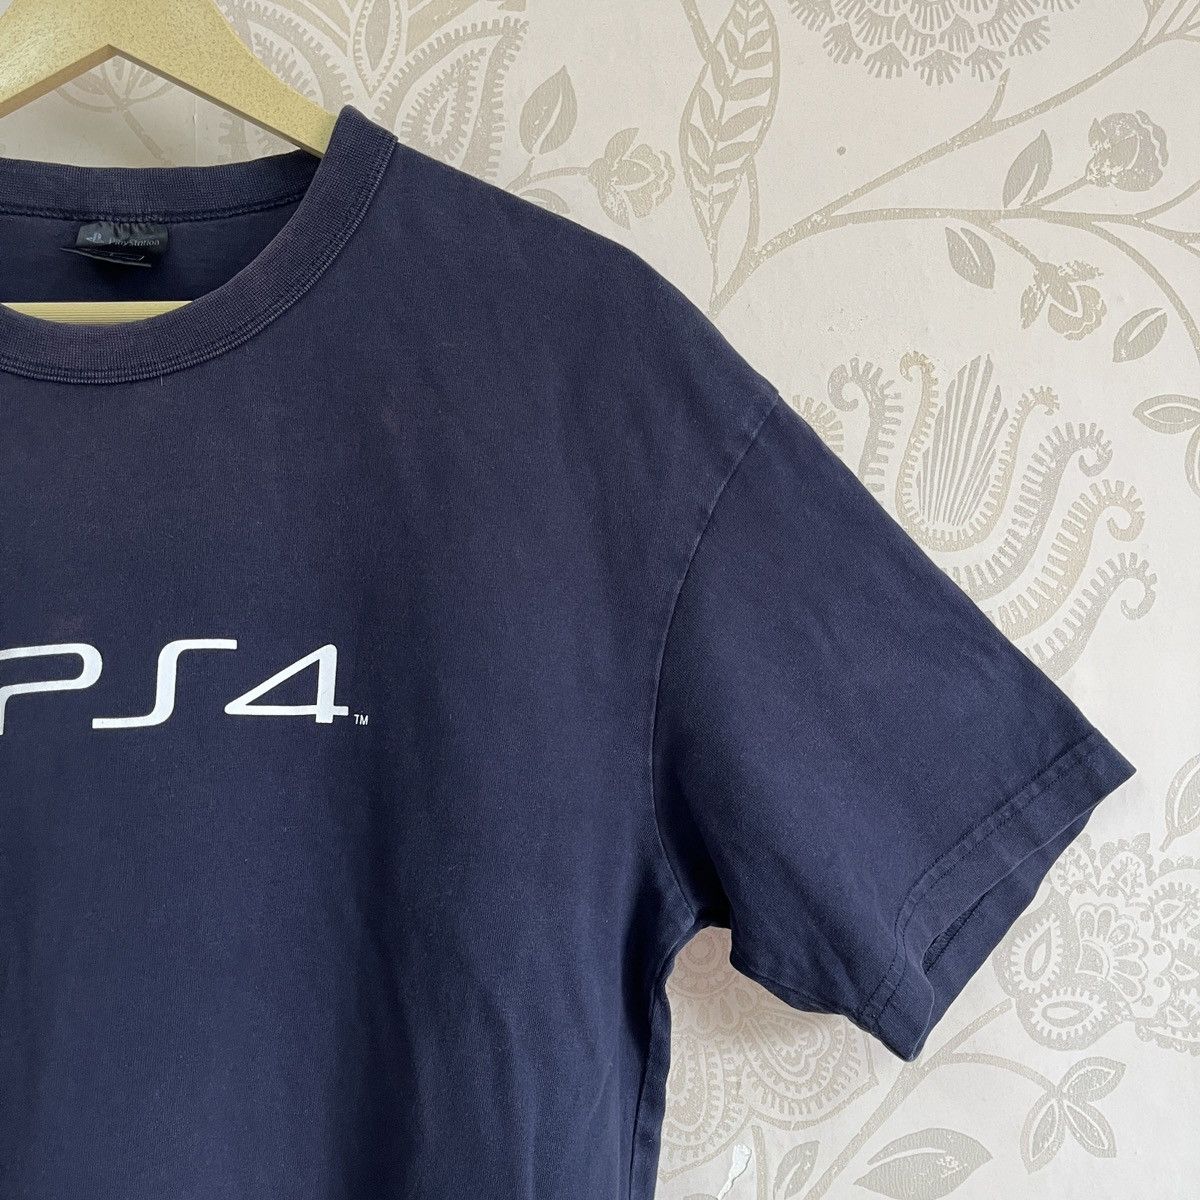 Playstation PS4 Promo TShirt Japan Official Licensed Product - 7